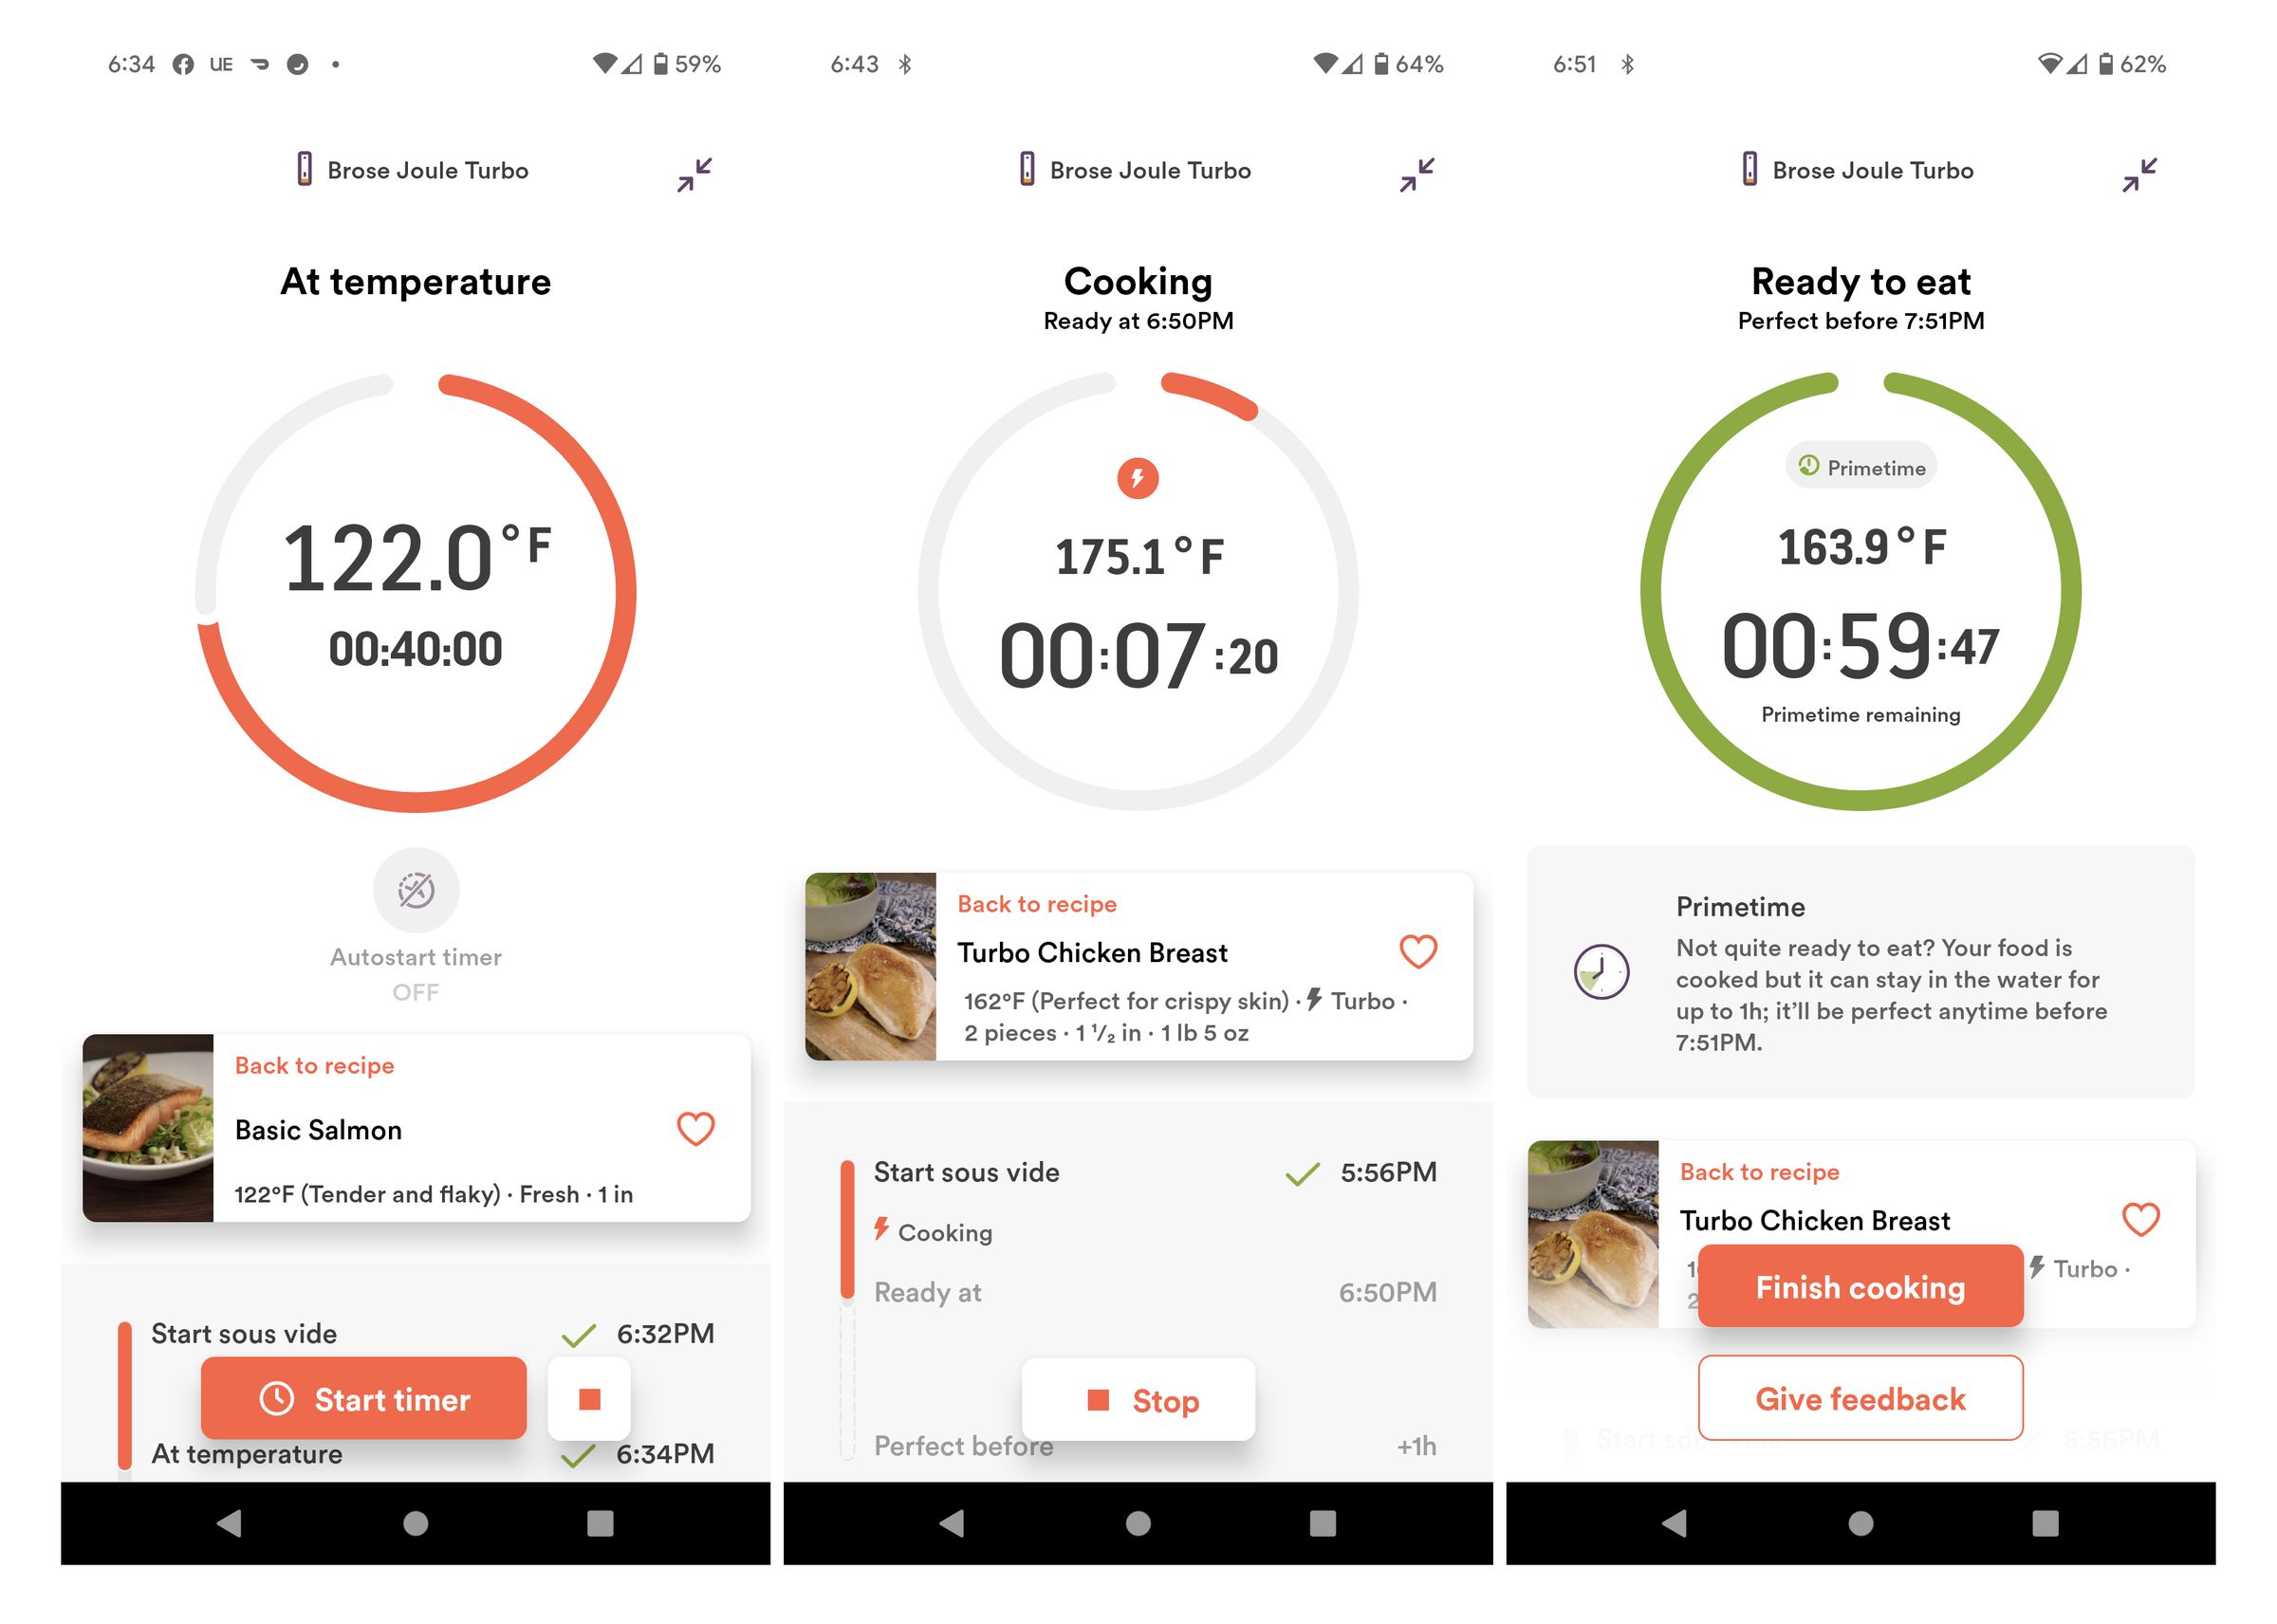 Screenshots of Breville’s Joule app showing various stages of the cooking process.